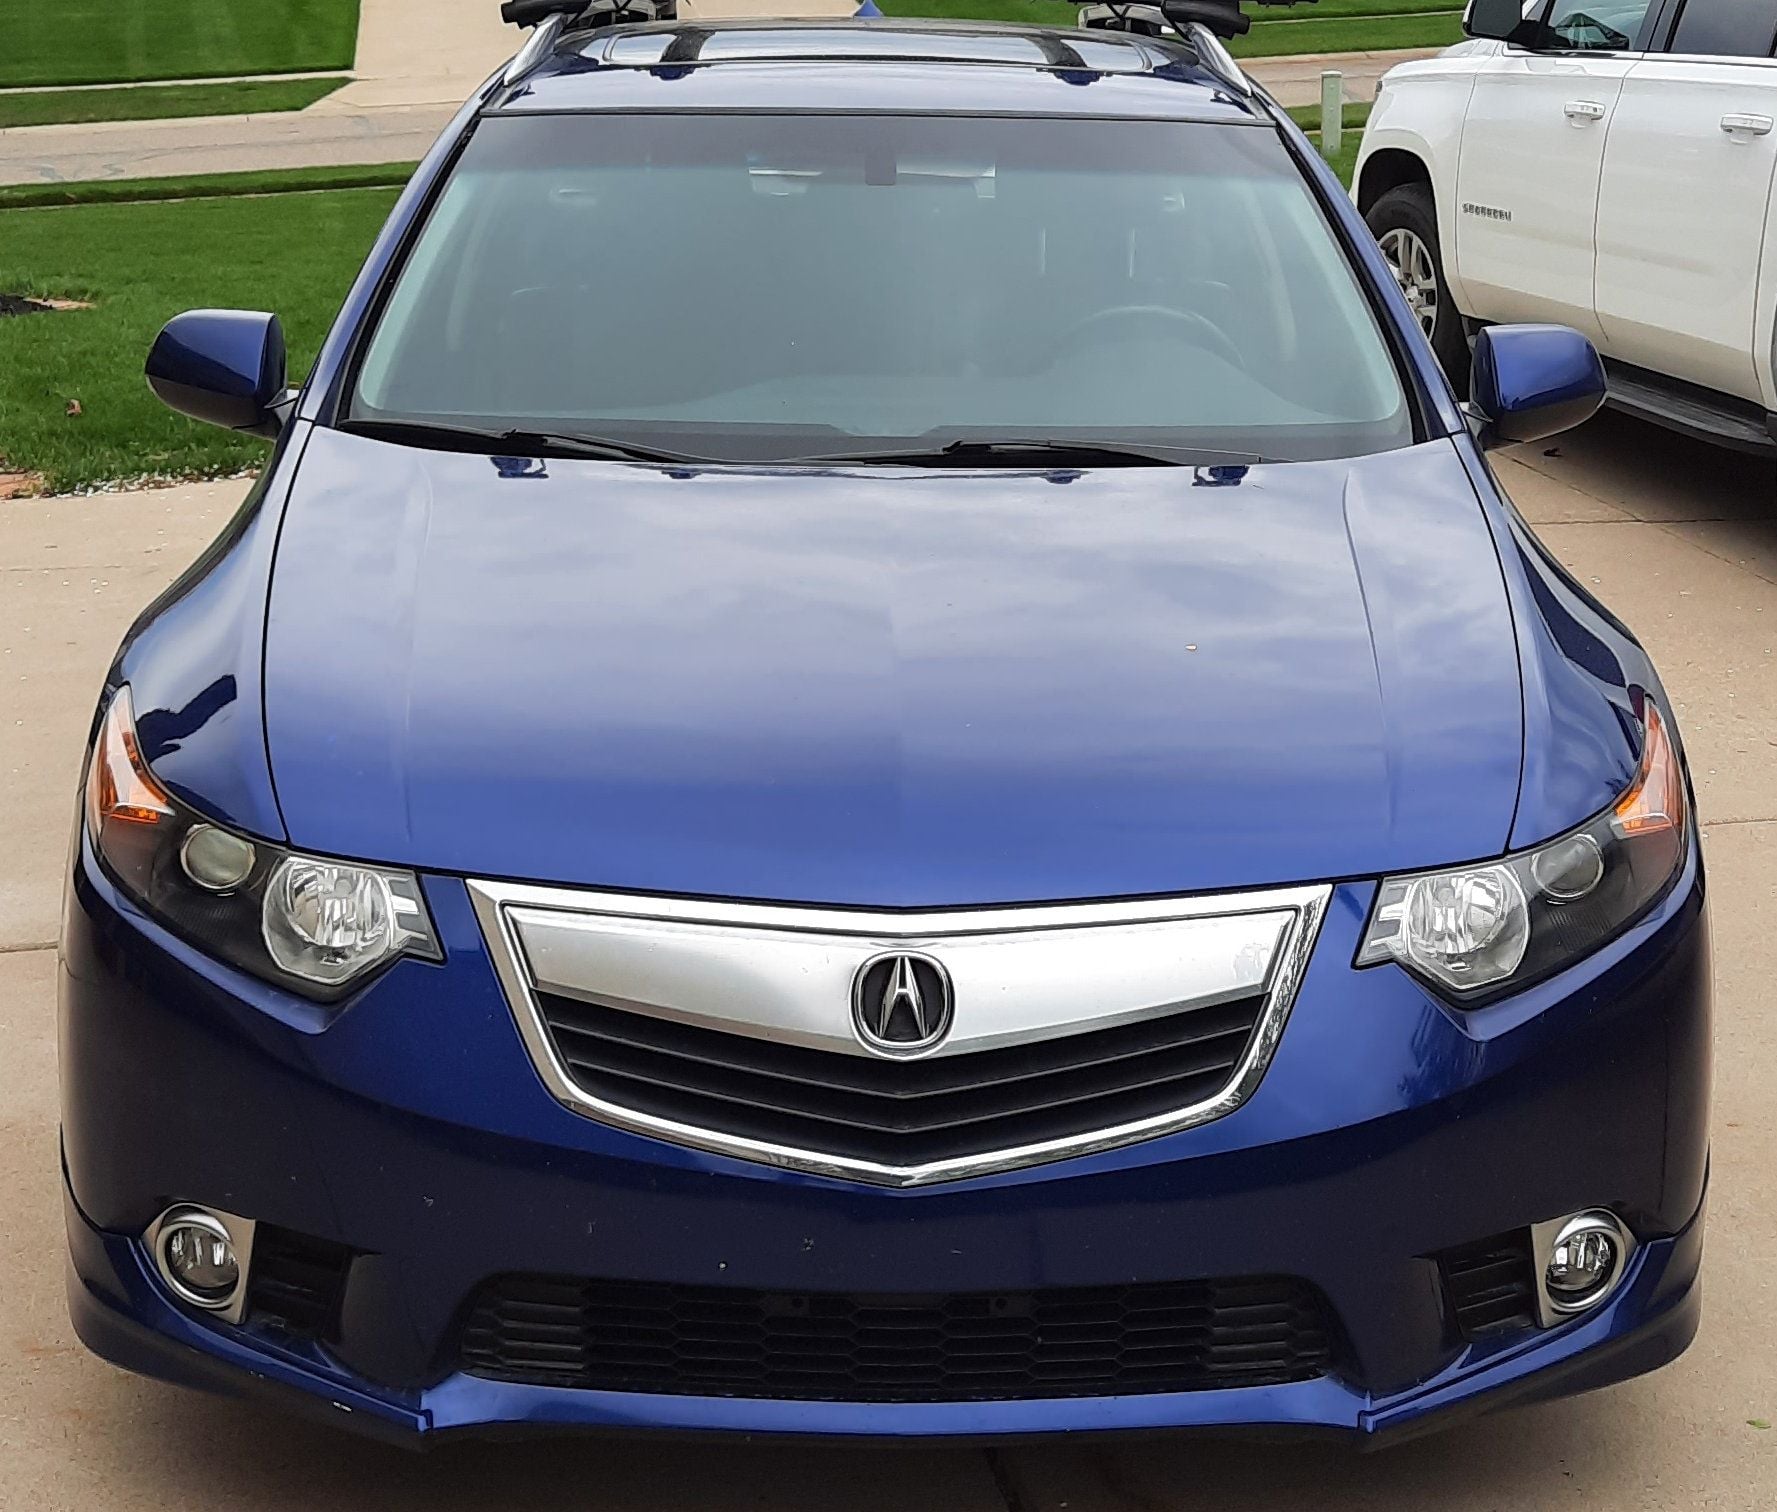 2012 Acura TSX - CLOSED: 2012 Acura TSX Tech Wagon For Sale - Used - VIN JH4CW2H69CC001410 - 87,600 Miles - 4 cyl - 2WD - Automatic - Wagon - Blue - Hartland, MI 48353, United States